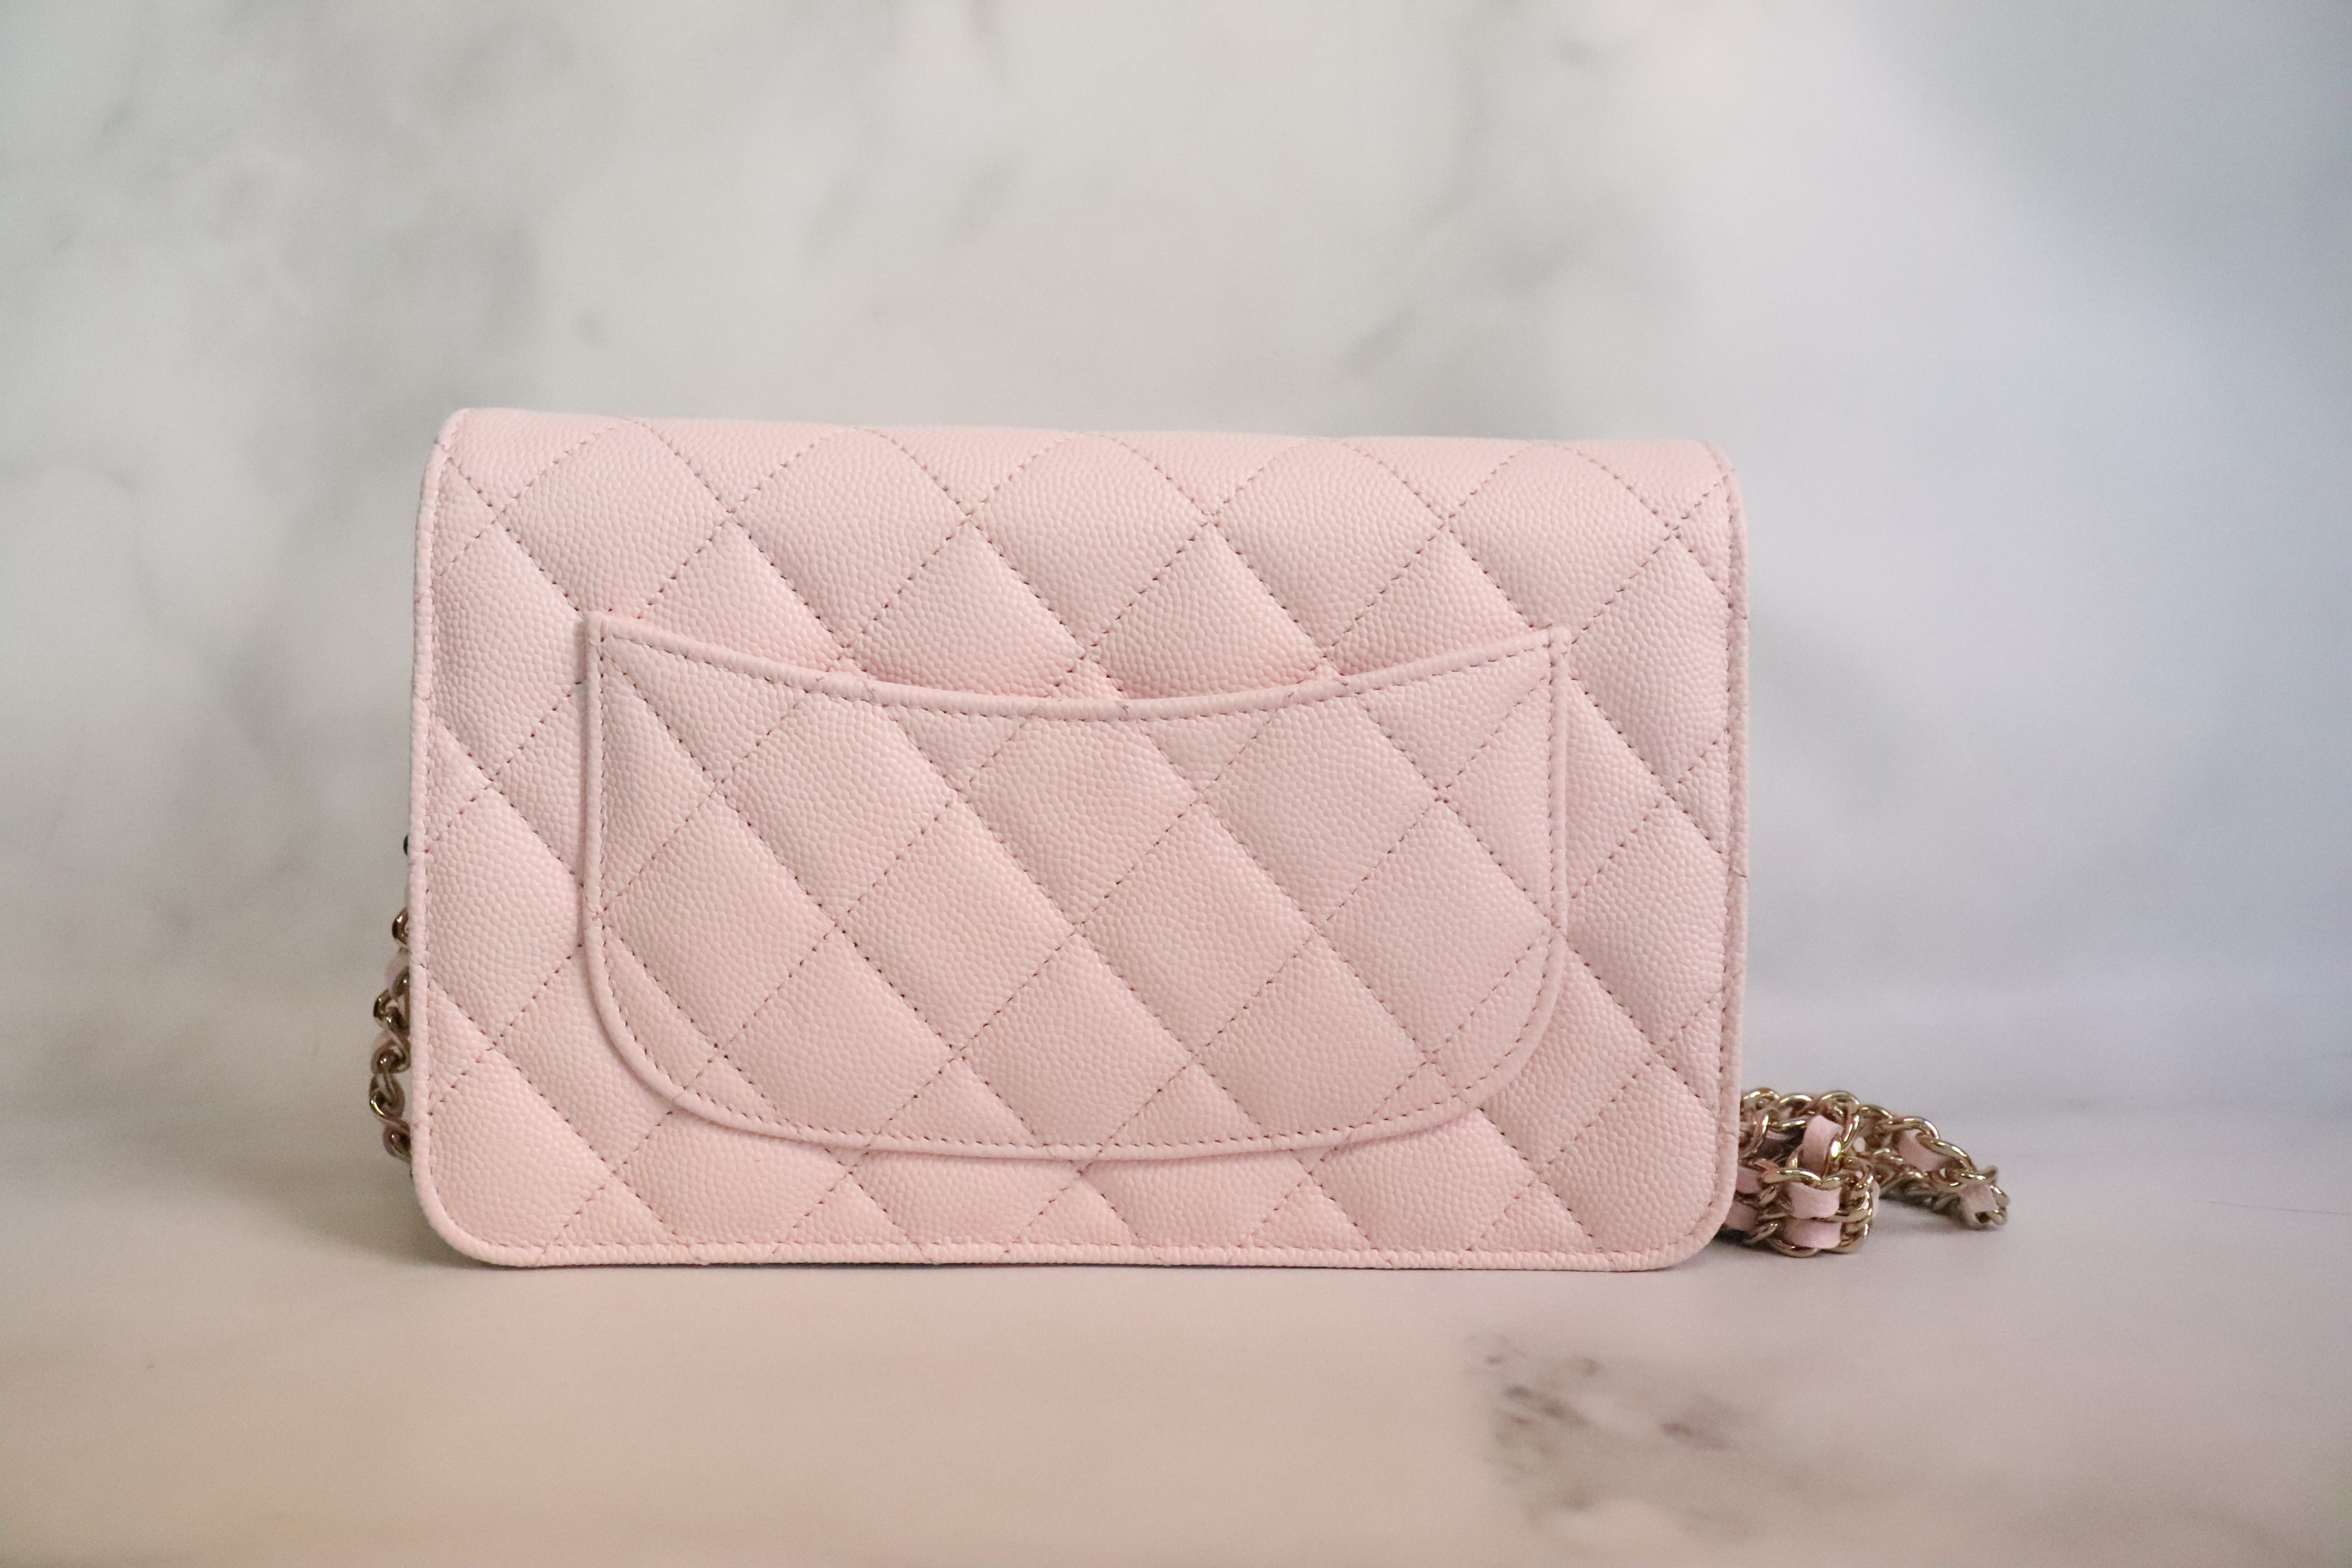 Timeless/classique leather wallet Chanel Pink in Leather - 37671022